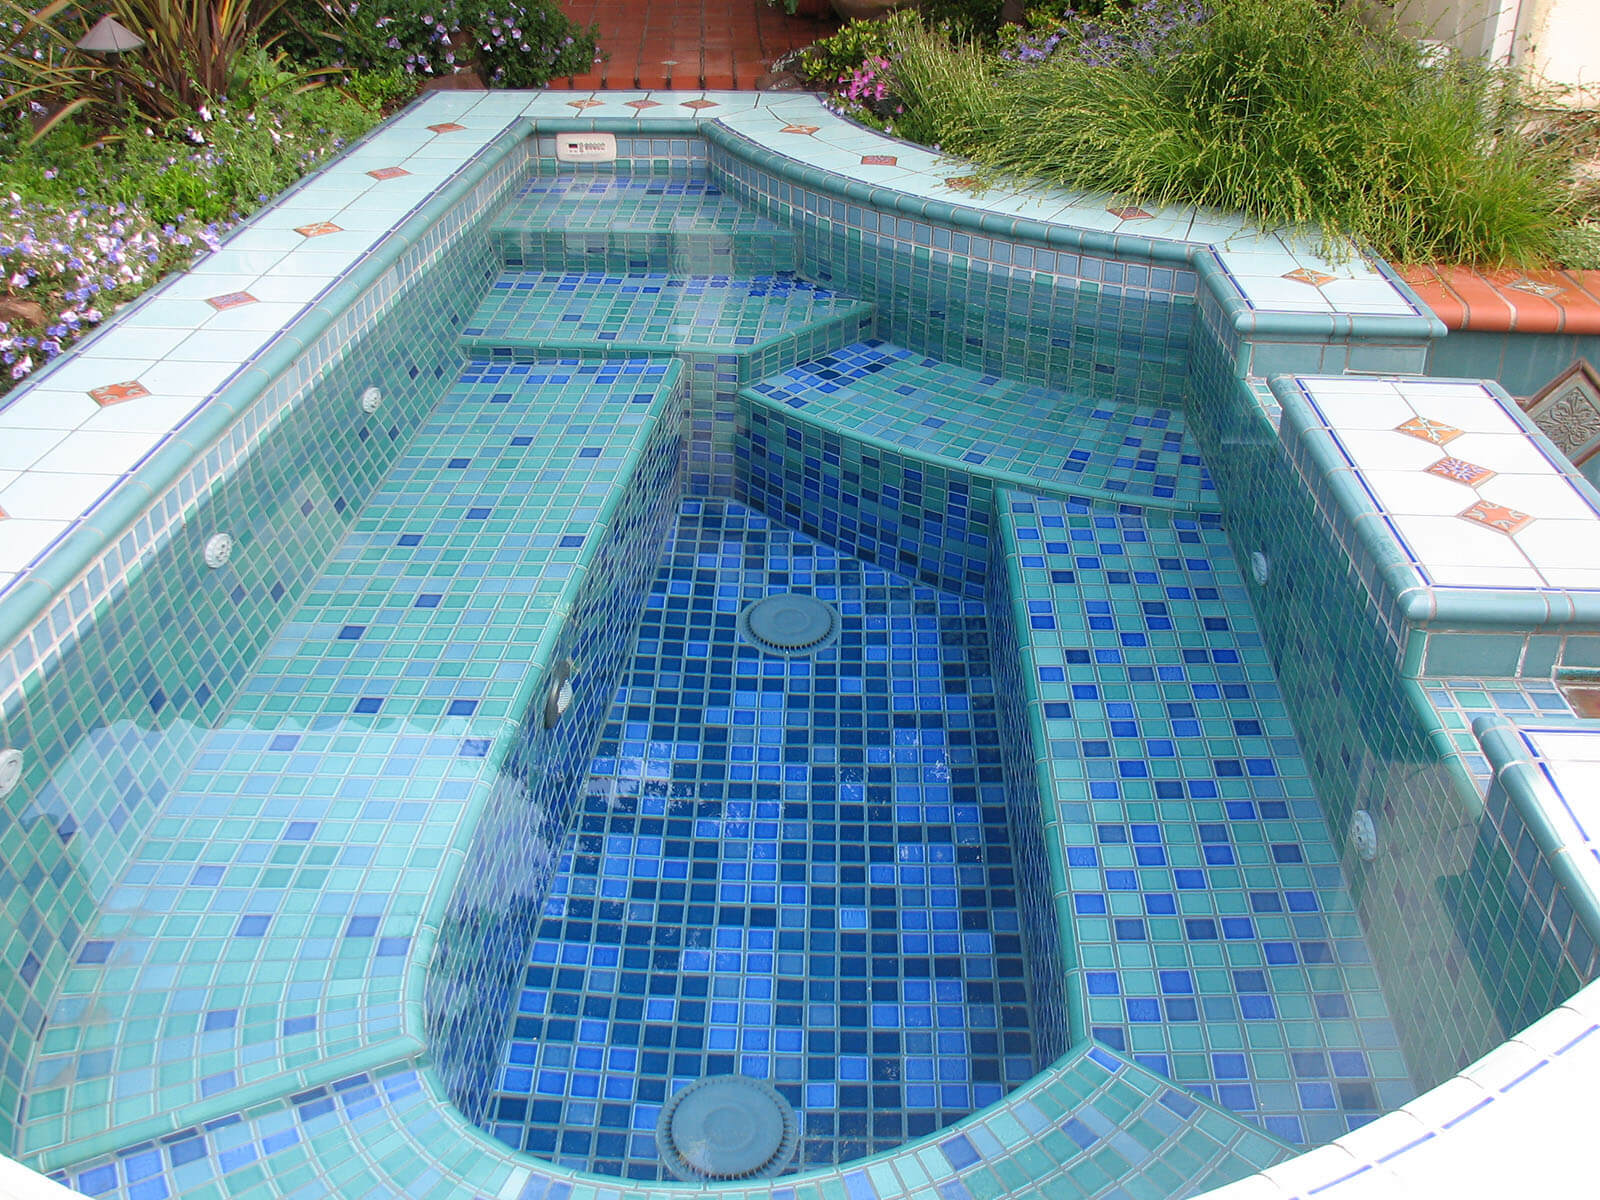 Custom shaped Jacuzzi with artistic blue mosaic tiling with white and tan topped mosaic borders flowing into pool below.